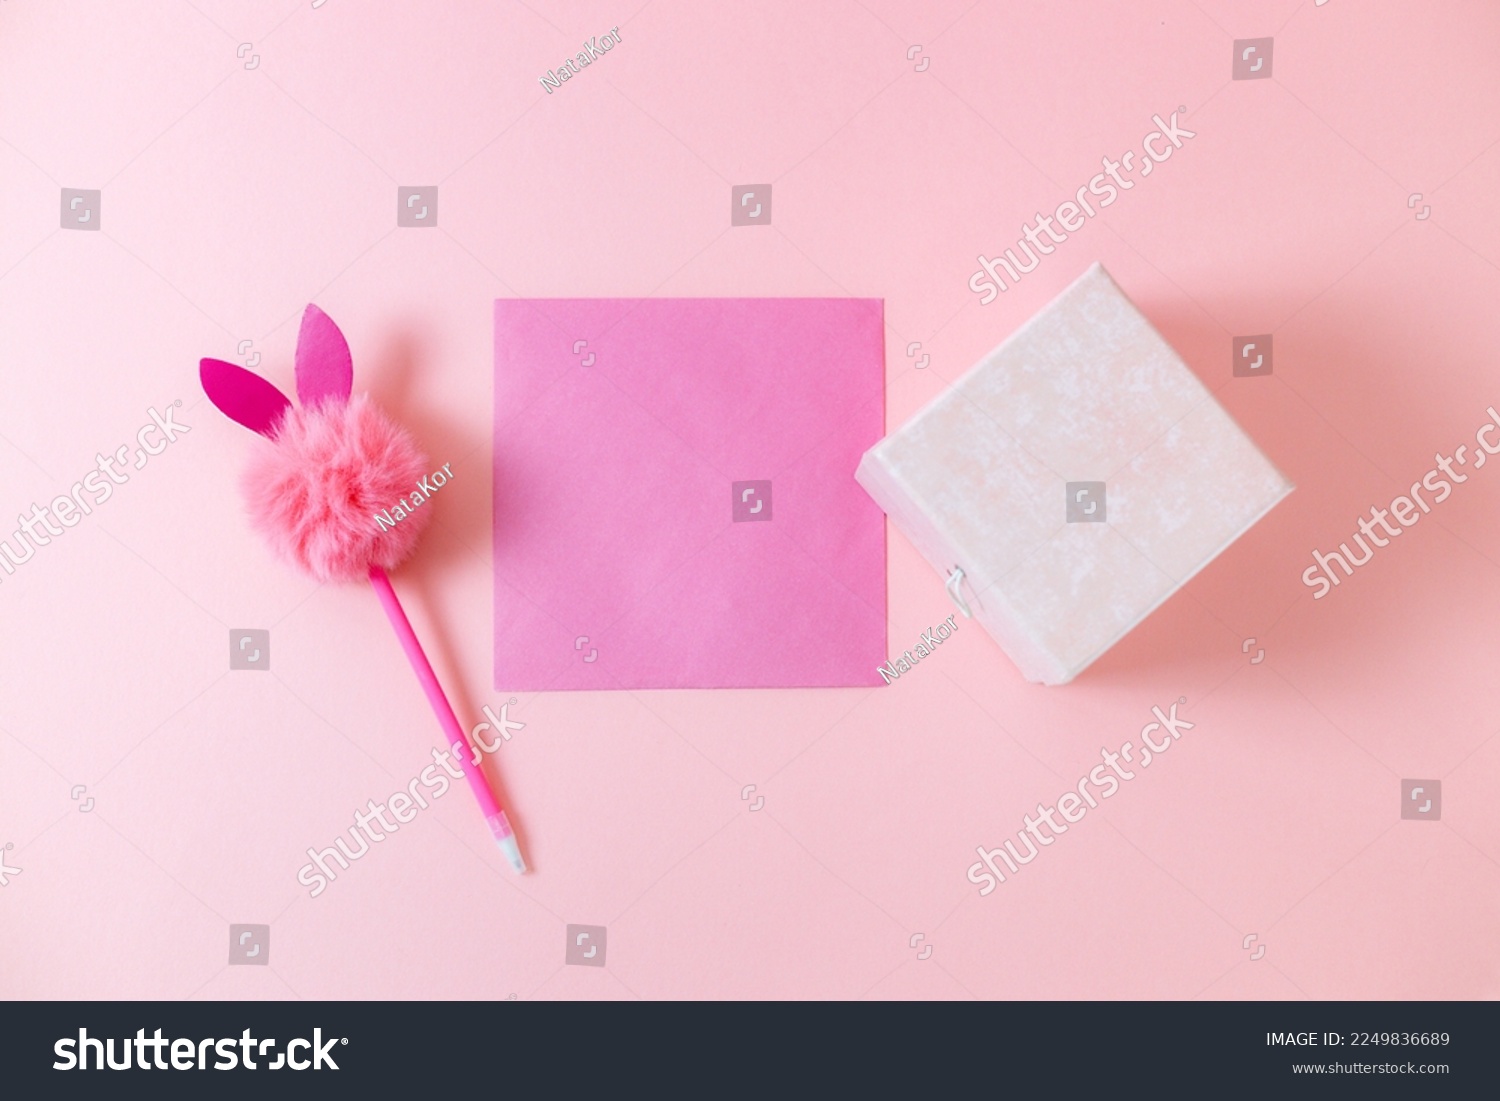 A gift box, a pink blank sheet, a pen with a fluffy head and bunny ears lie in the center on a pale pink background with copy space, flat close-up. Valentine's day concept. #2249836689